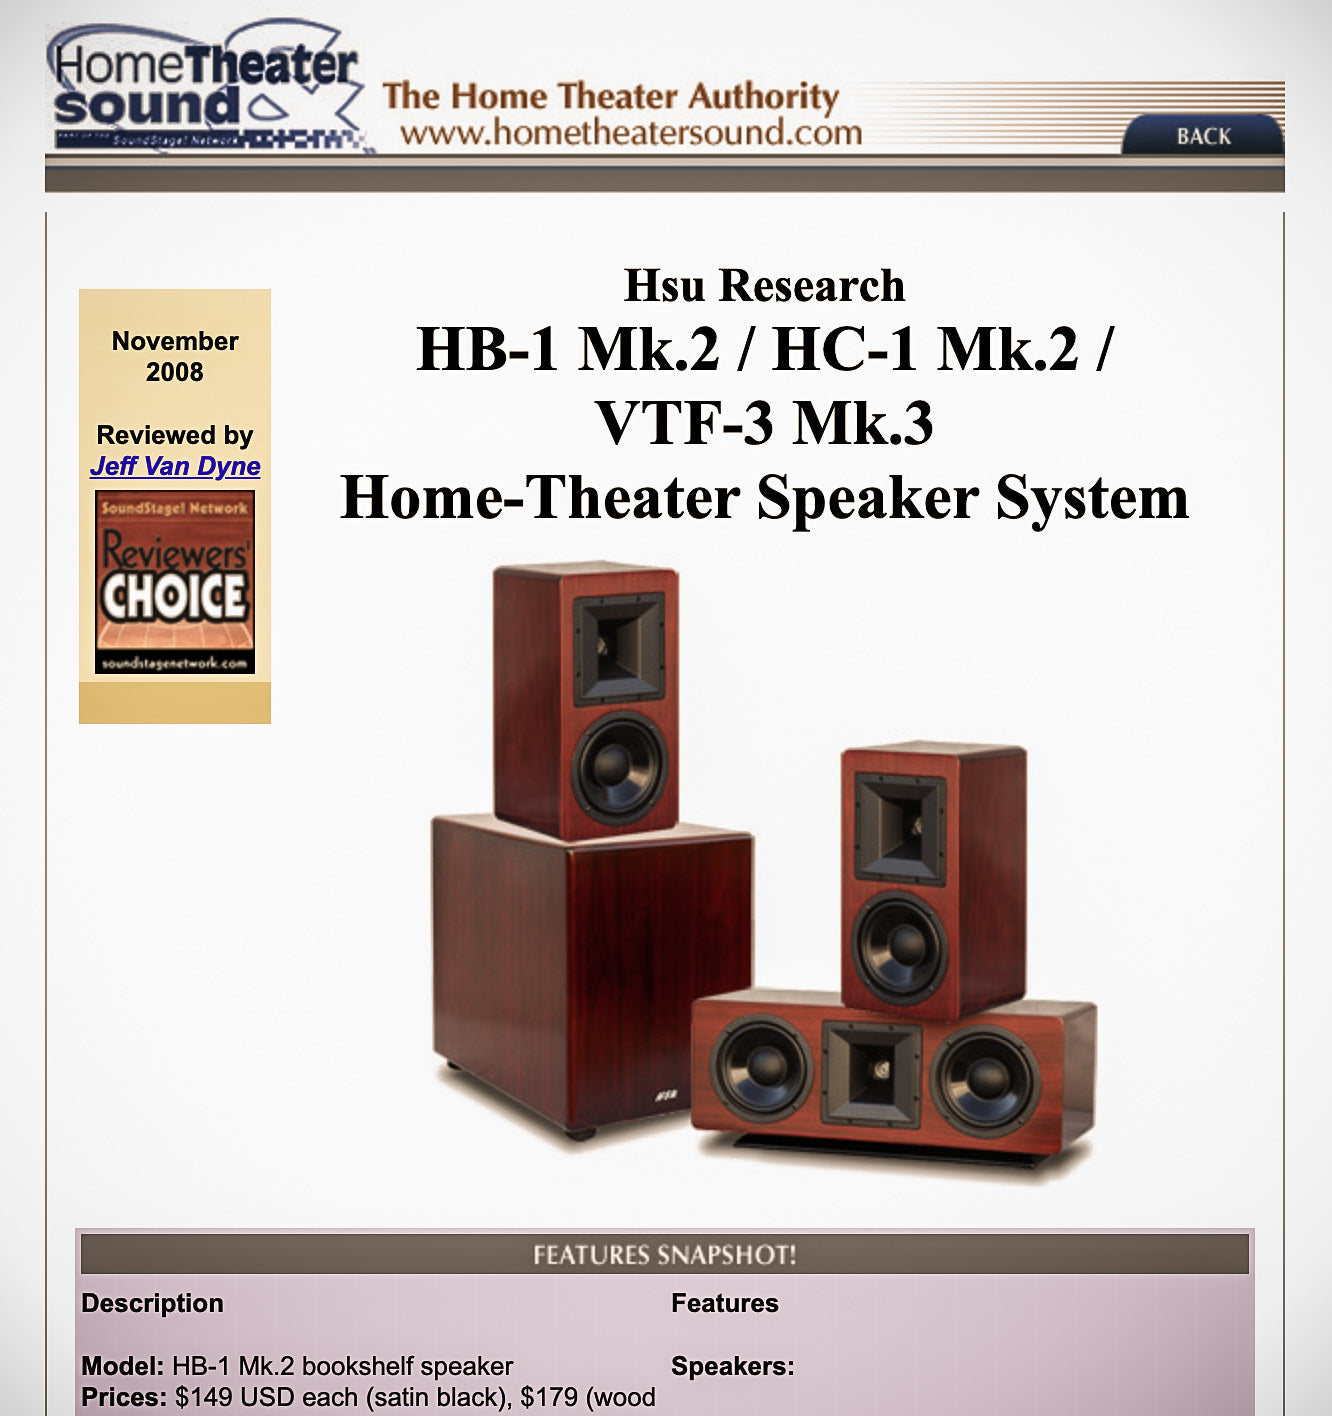 Home Theater Sound 2008 Product of the Year - HB-1 Mk.2 / HC-1 Mk.2 / VTF-3 Mk.3